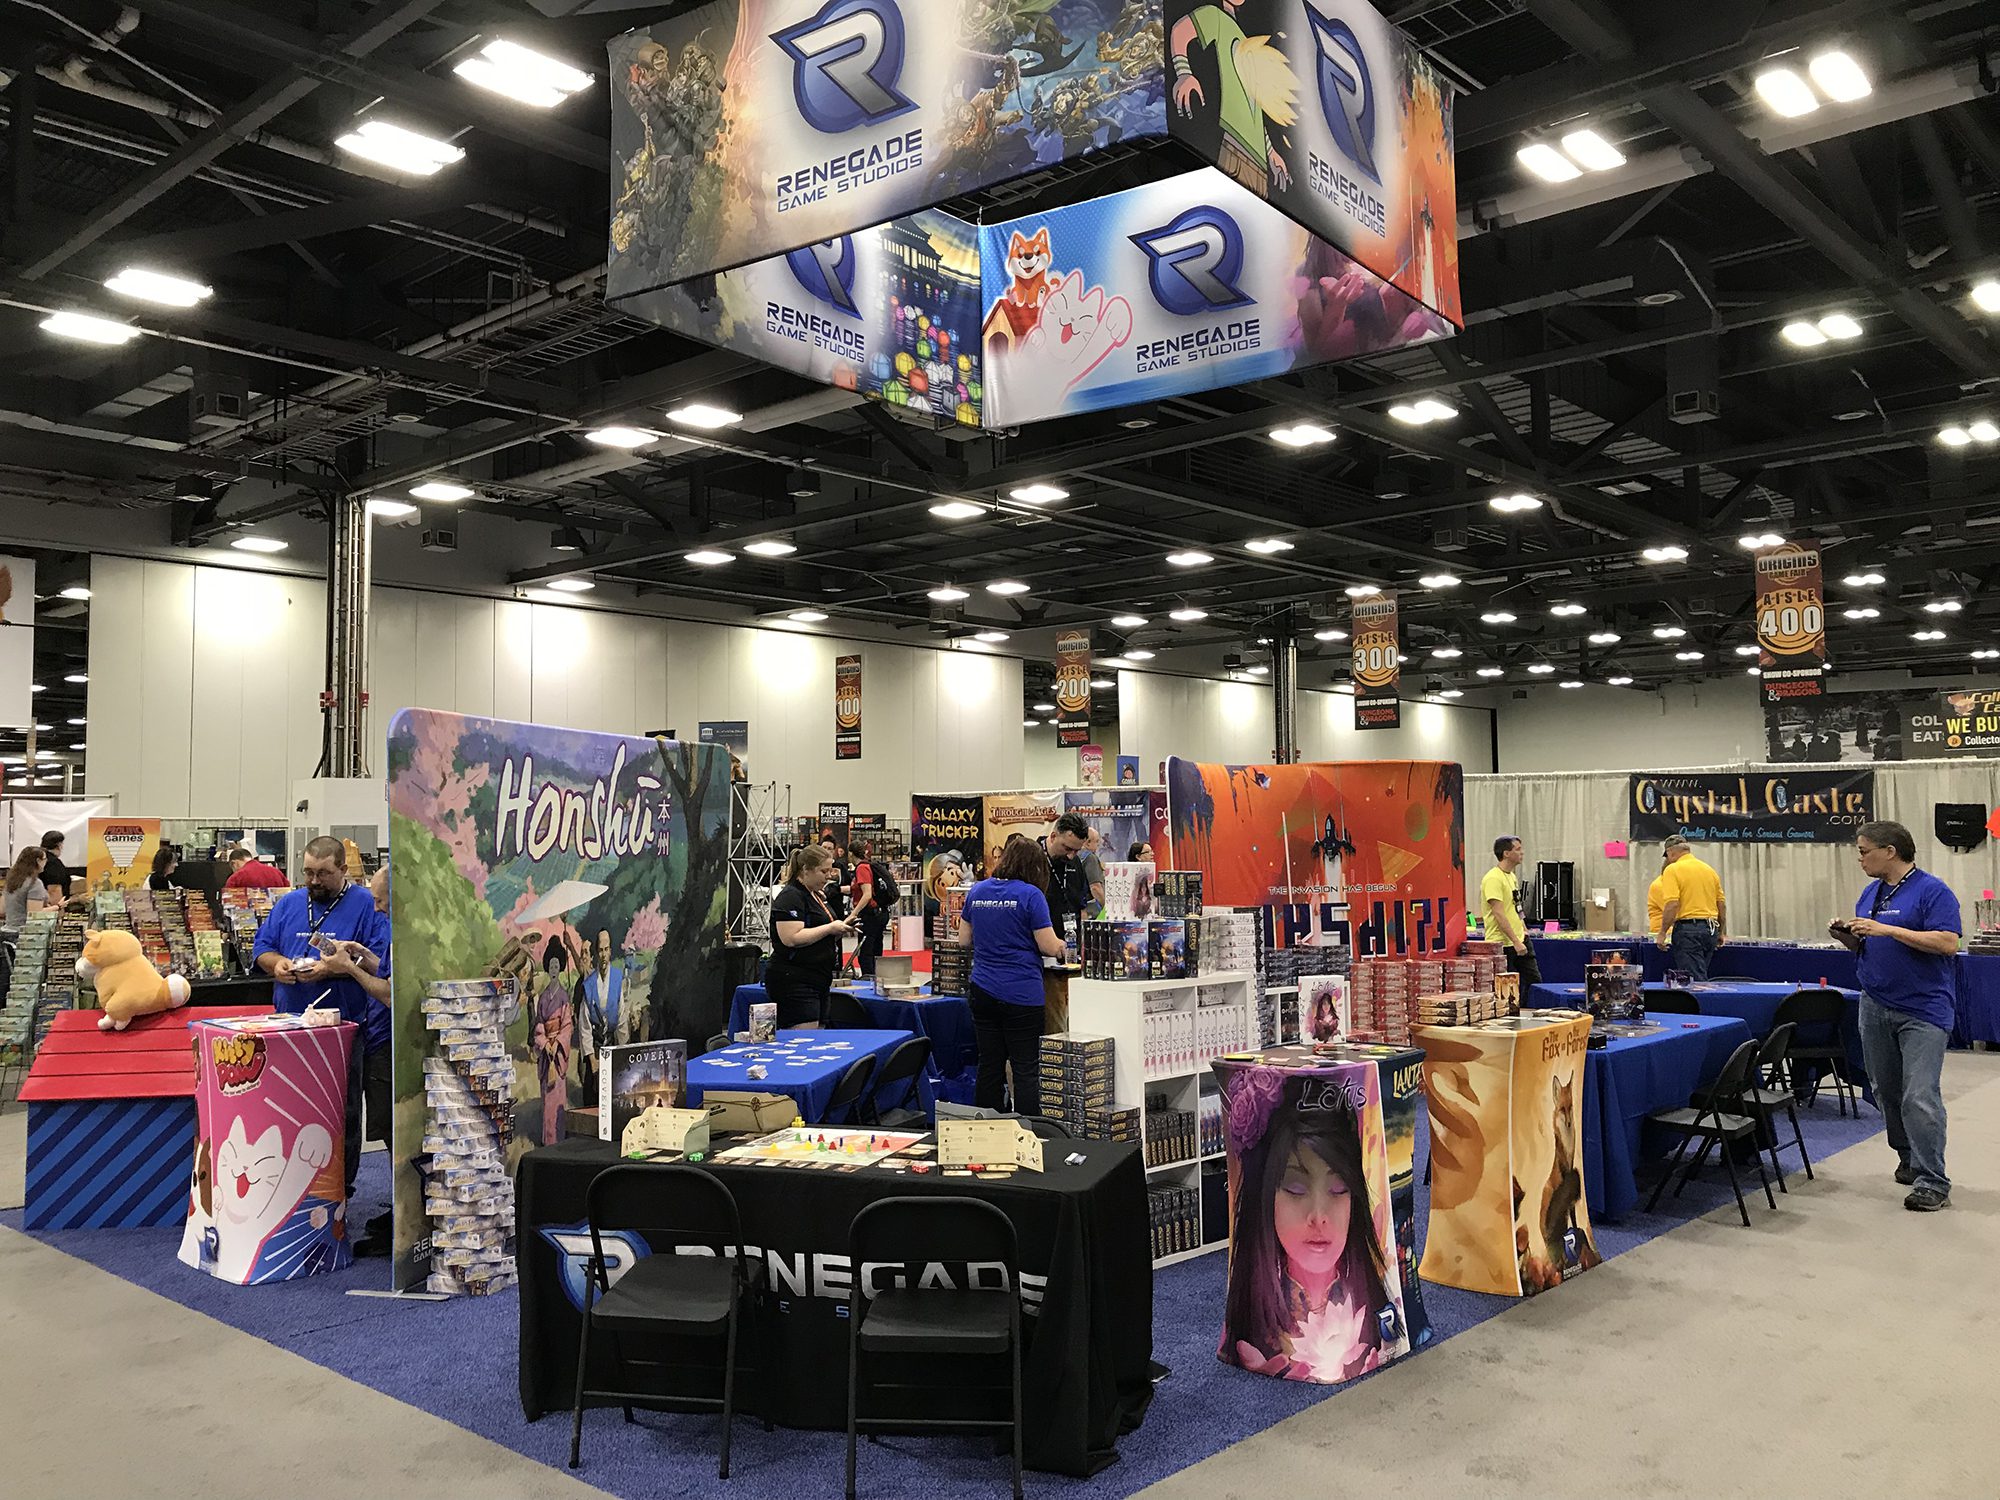 The 20232024 Guide To Board Game Conventions — Meeple Mountain